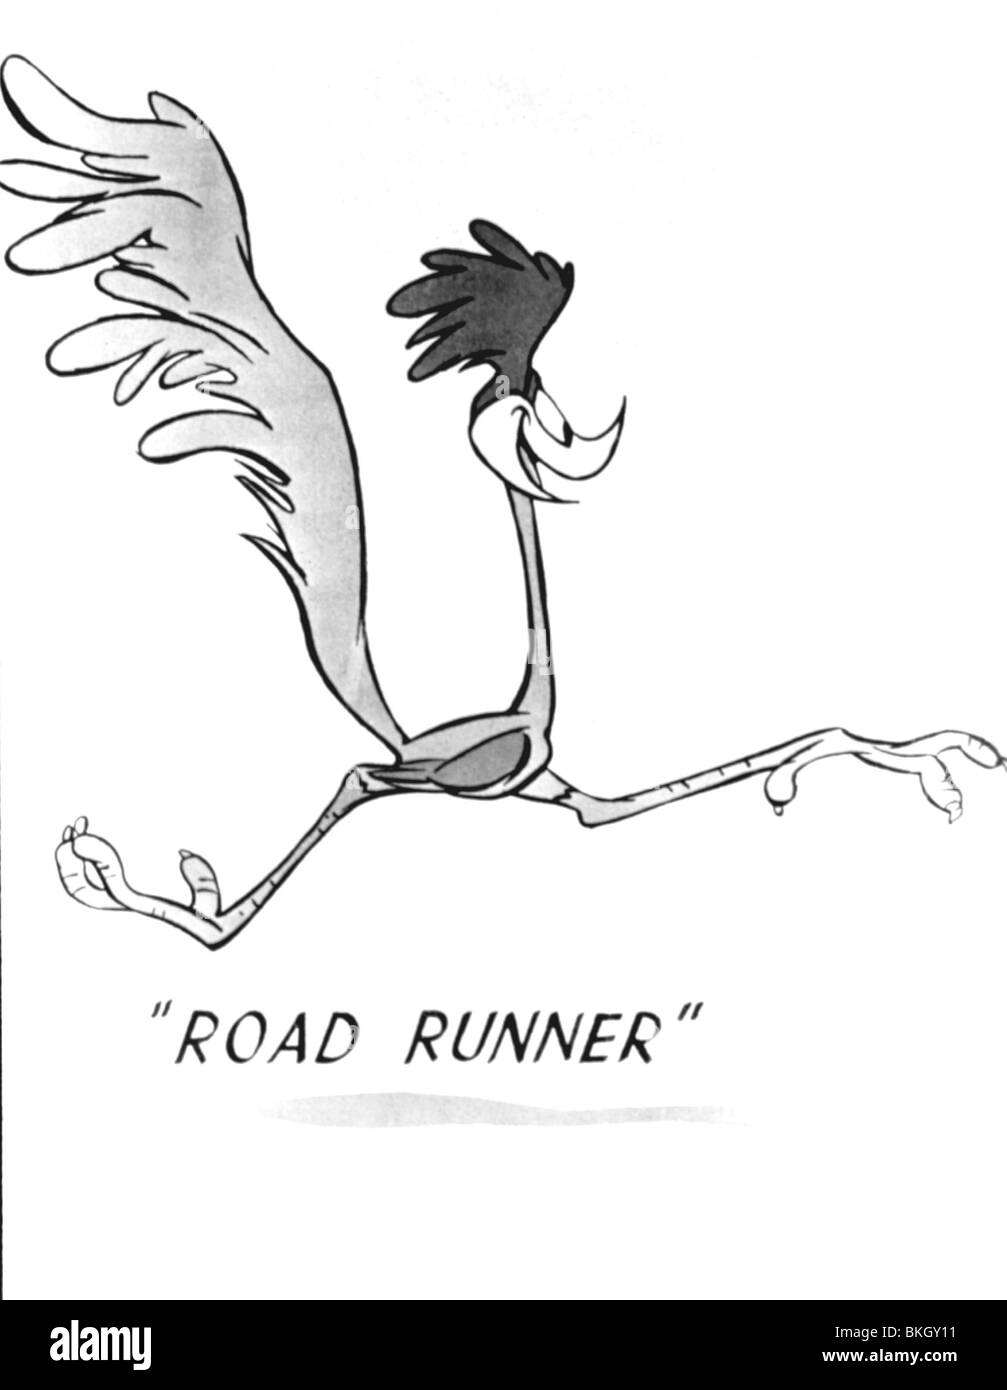 Road runner Black and White Stock Photos & Images - Alamy